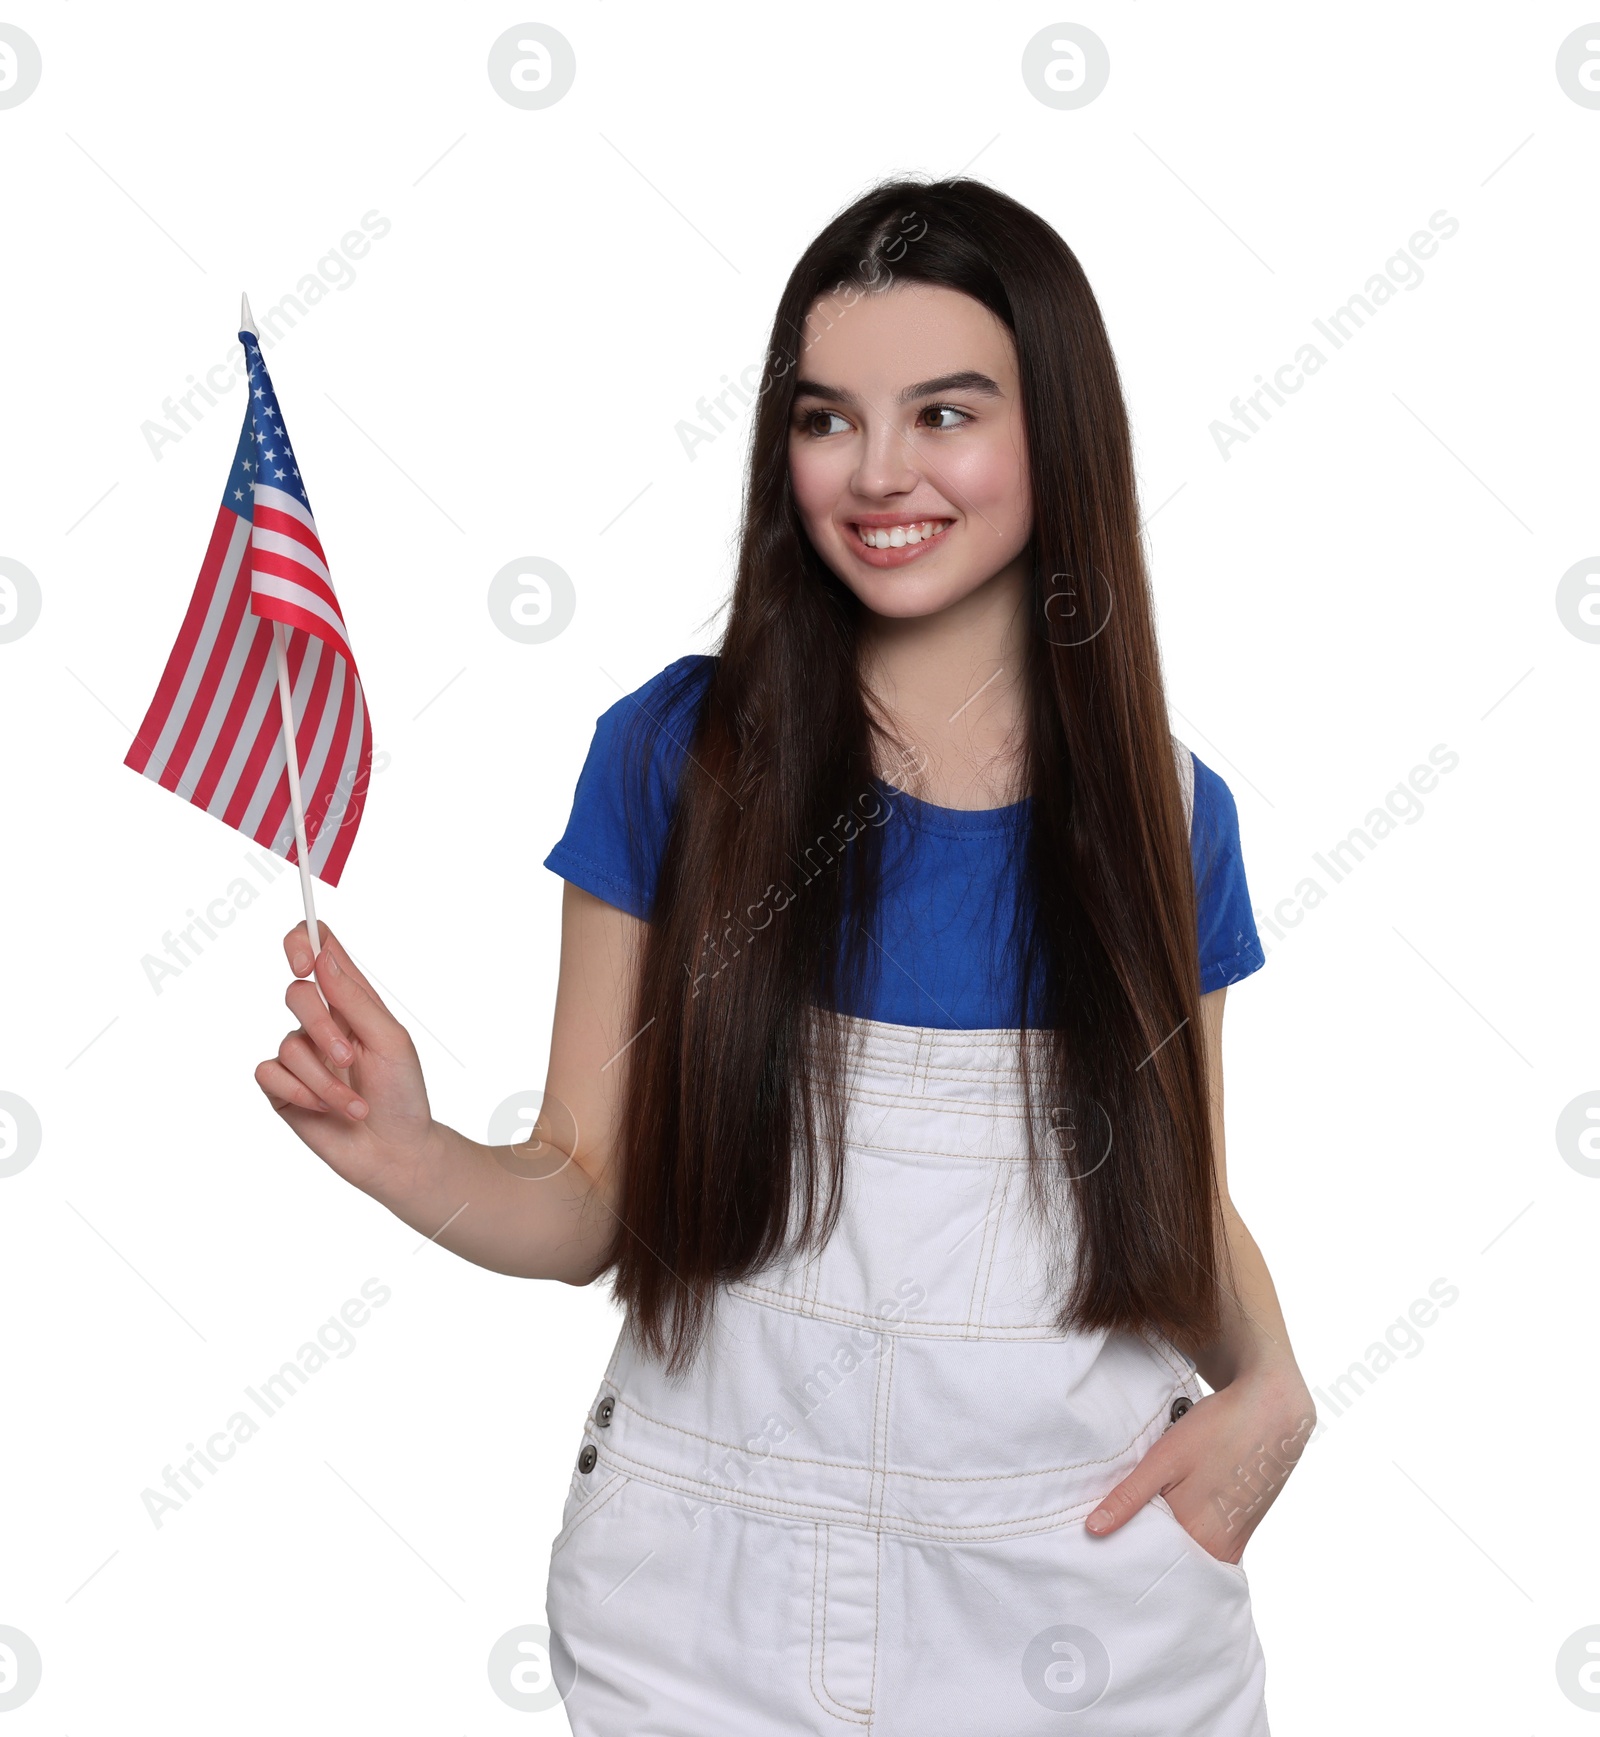 Image of 4th of July - Independence day of America. Happy teenage girl holding national flag of United States on white background